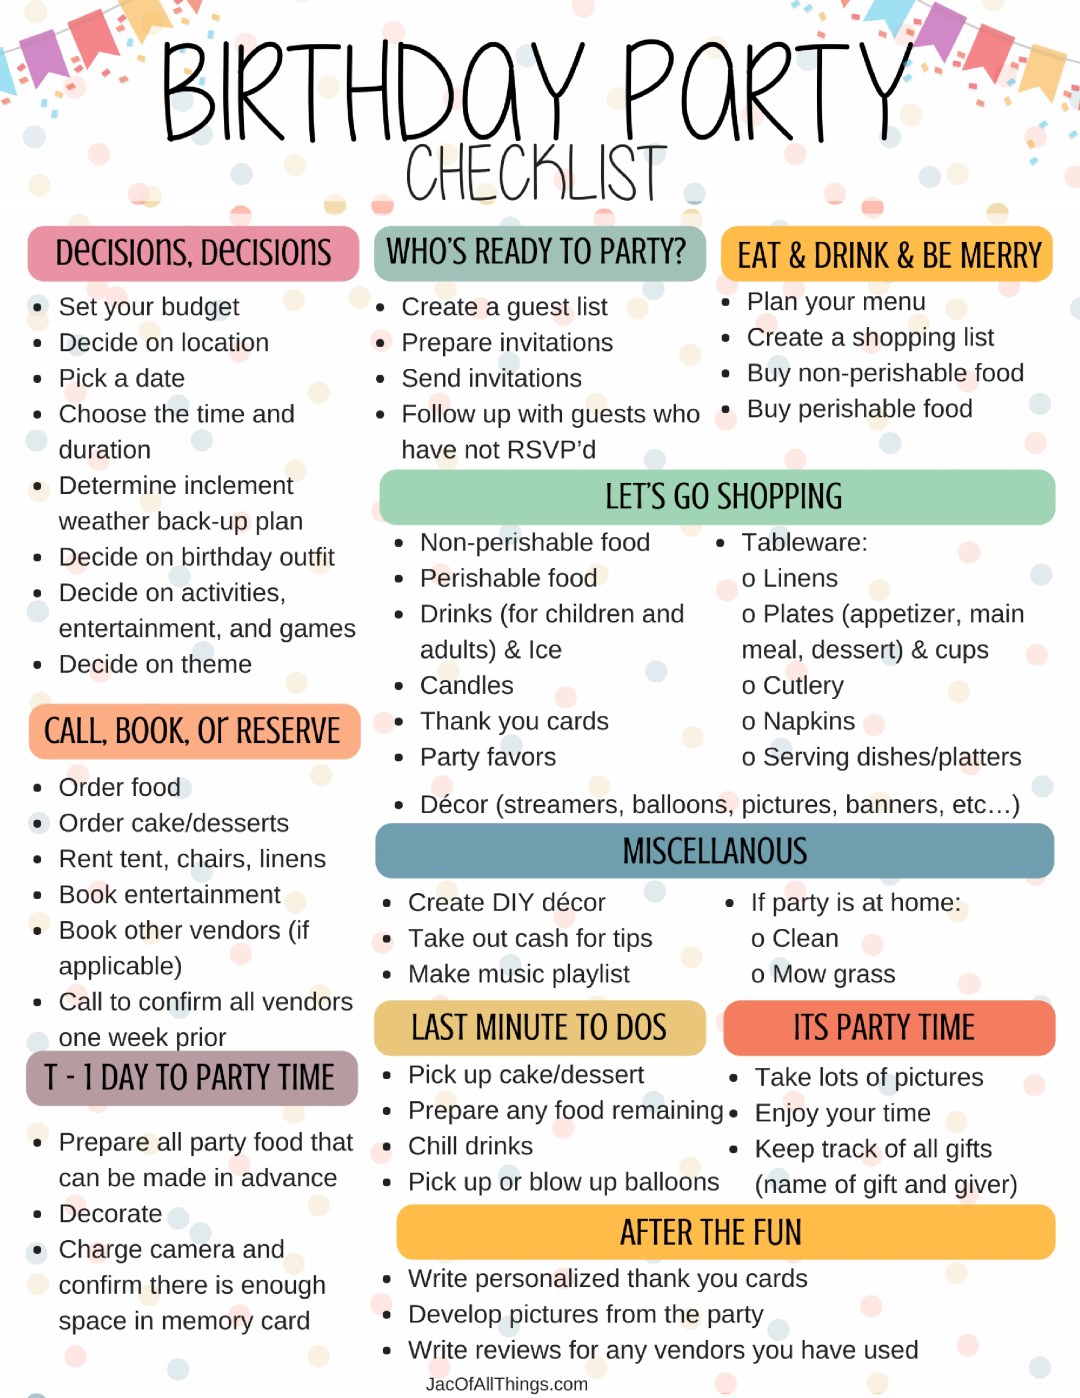 26-life-easing-birthday-party-checklists-kitty-baby-love